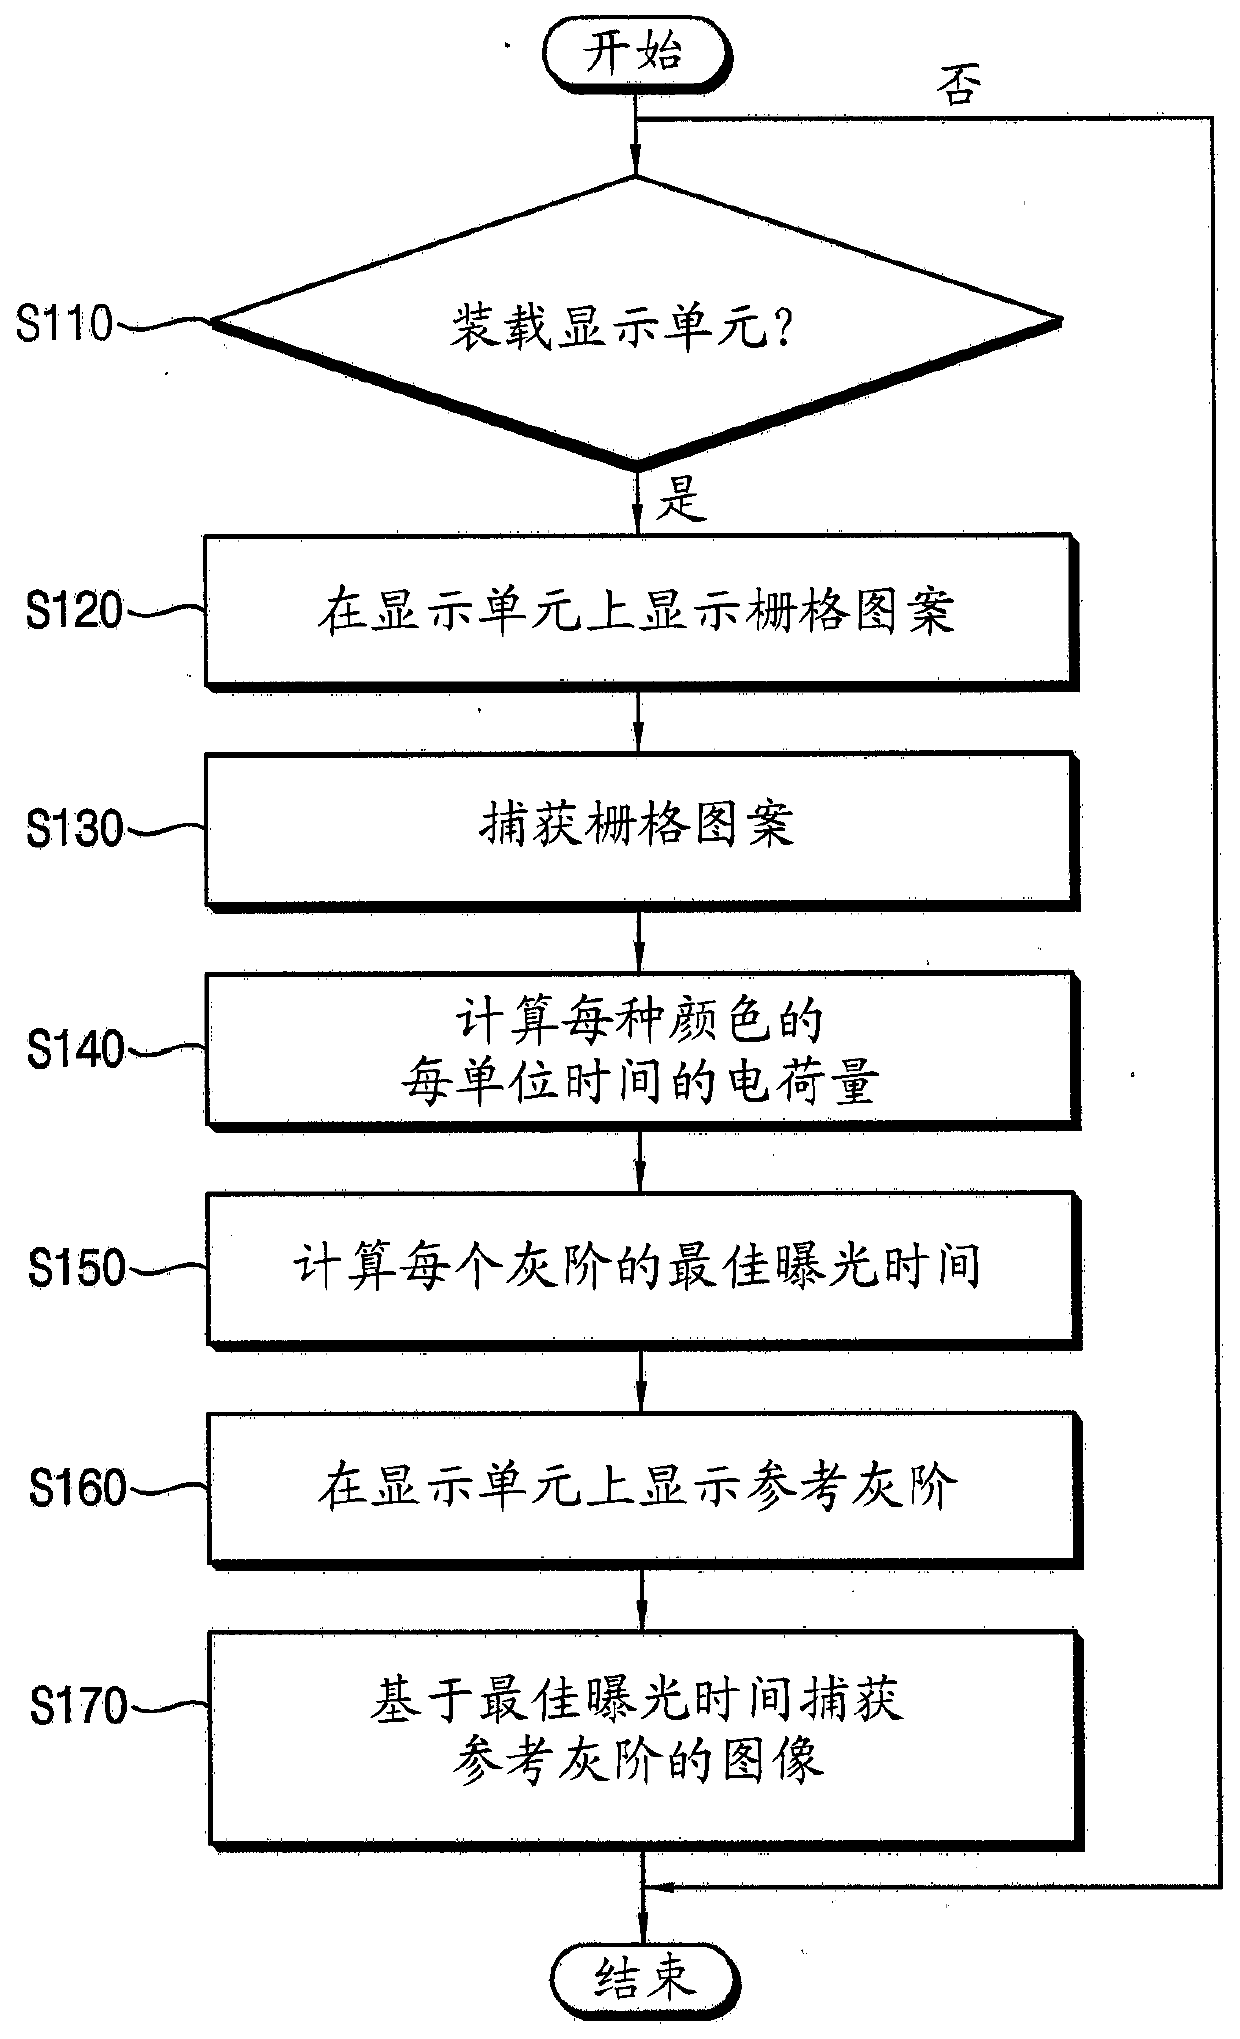 Vision inspection apparatus and method of driving the same